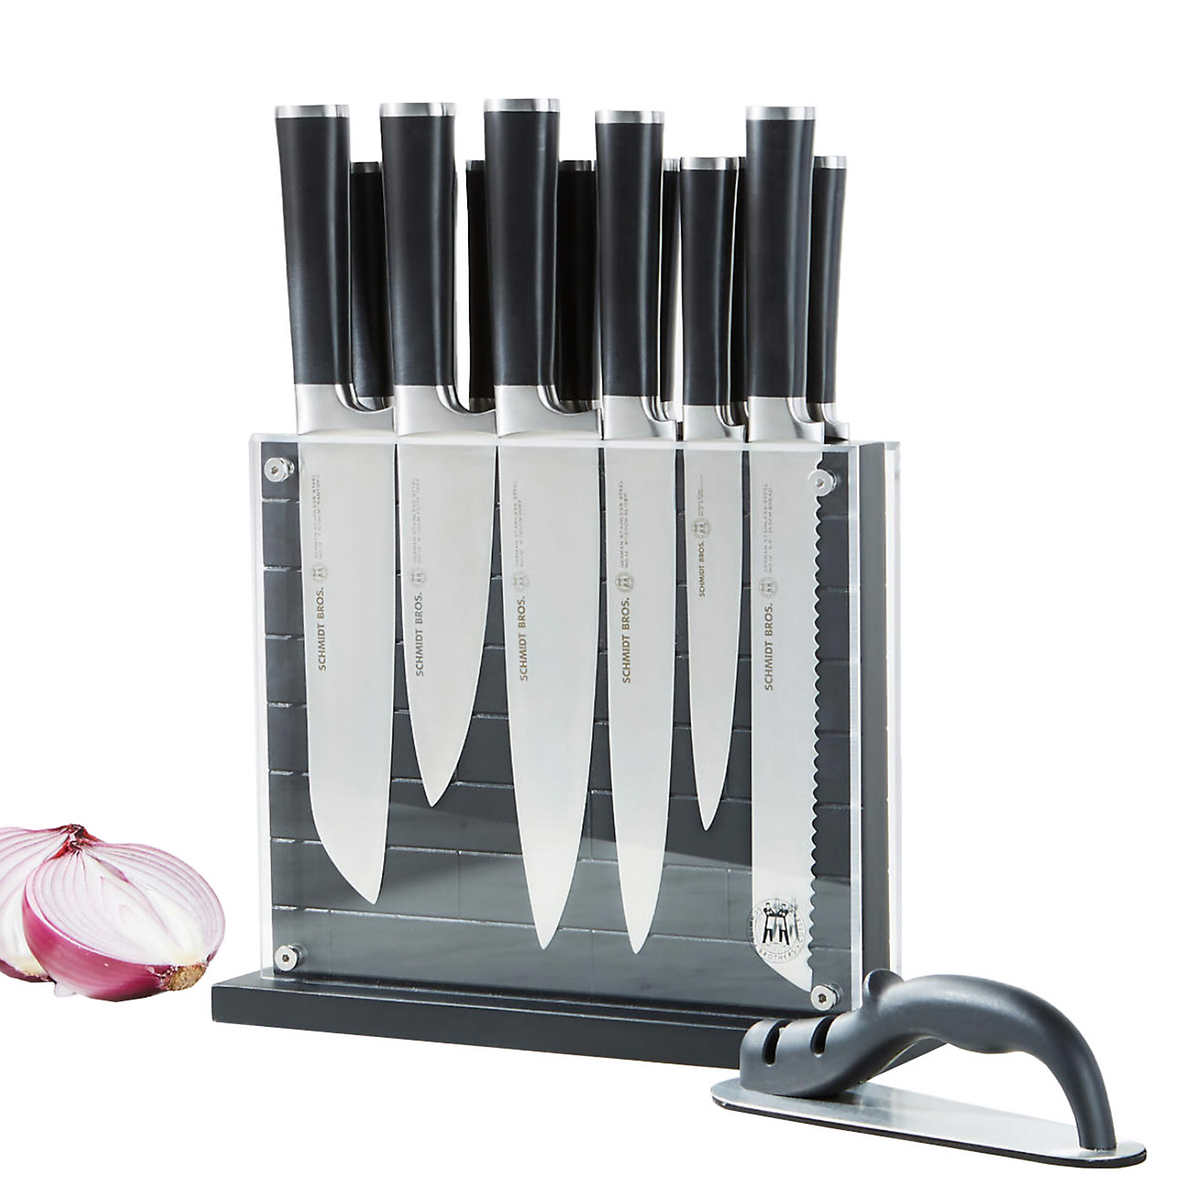 Schmidt Brothers-Cutlery Stone Series 14-Piece Kitchen Knife Set,  High-Carbon German Stainless Steel Cutlery, Two-stage Knife Sharpener and  Clear